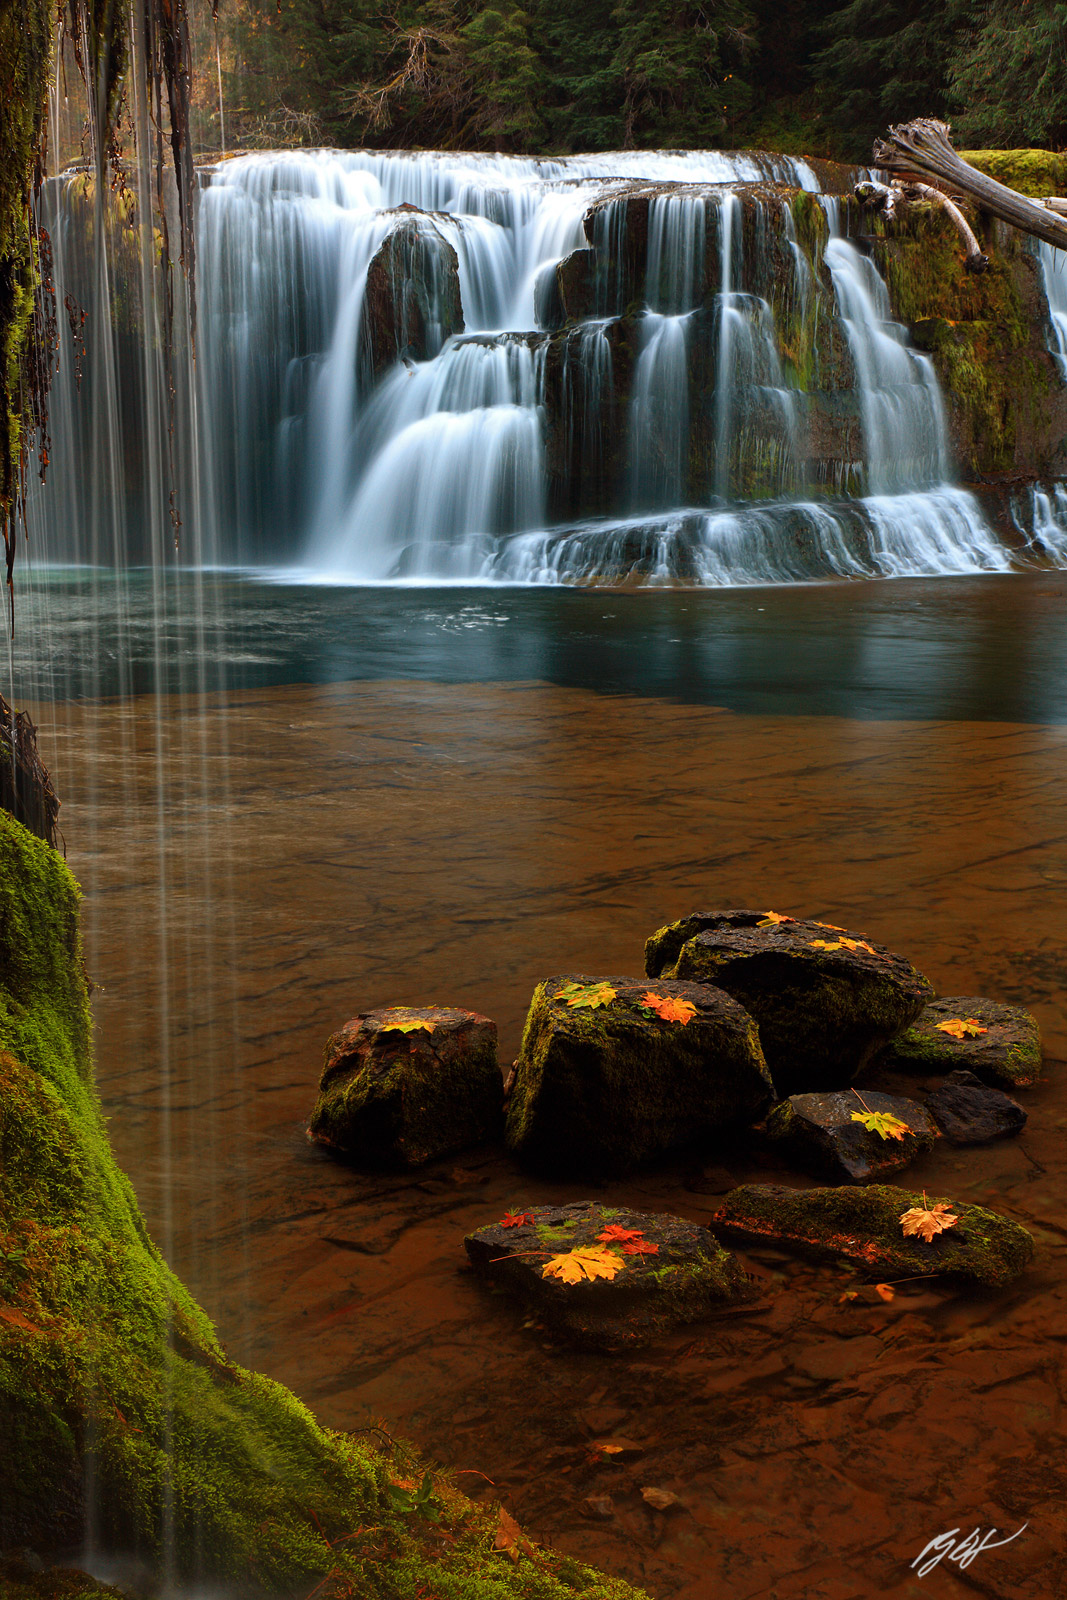 Fall Leaves and Lower Lewis River Falls in the Gifford Pichot National Forest in Washington